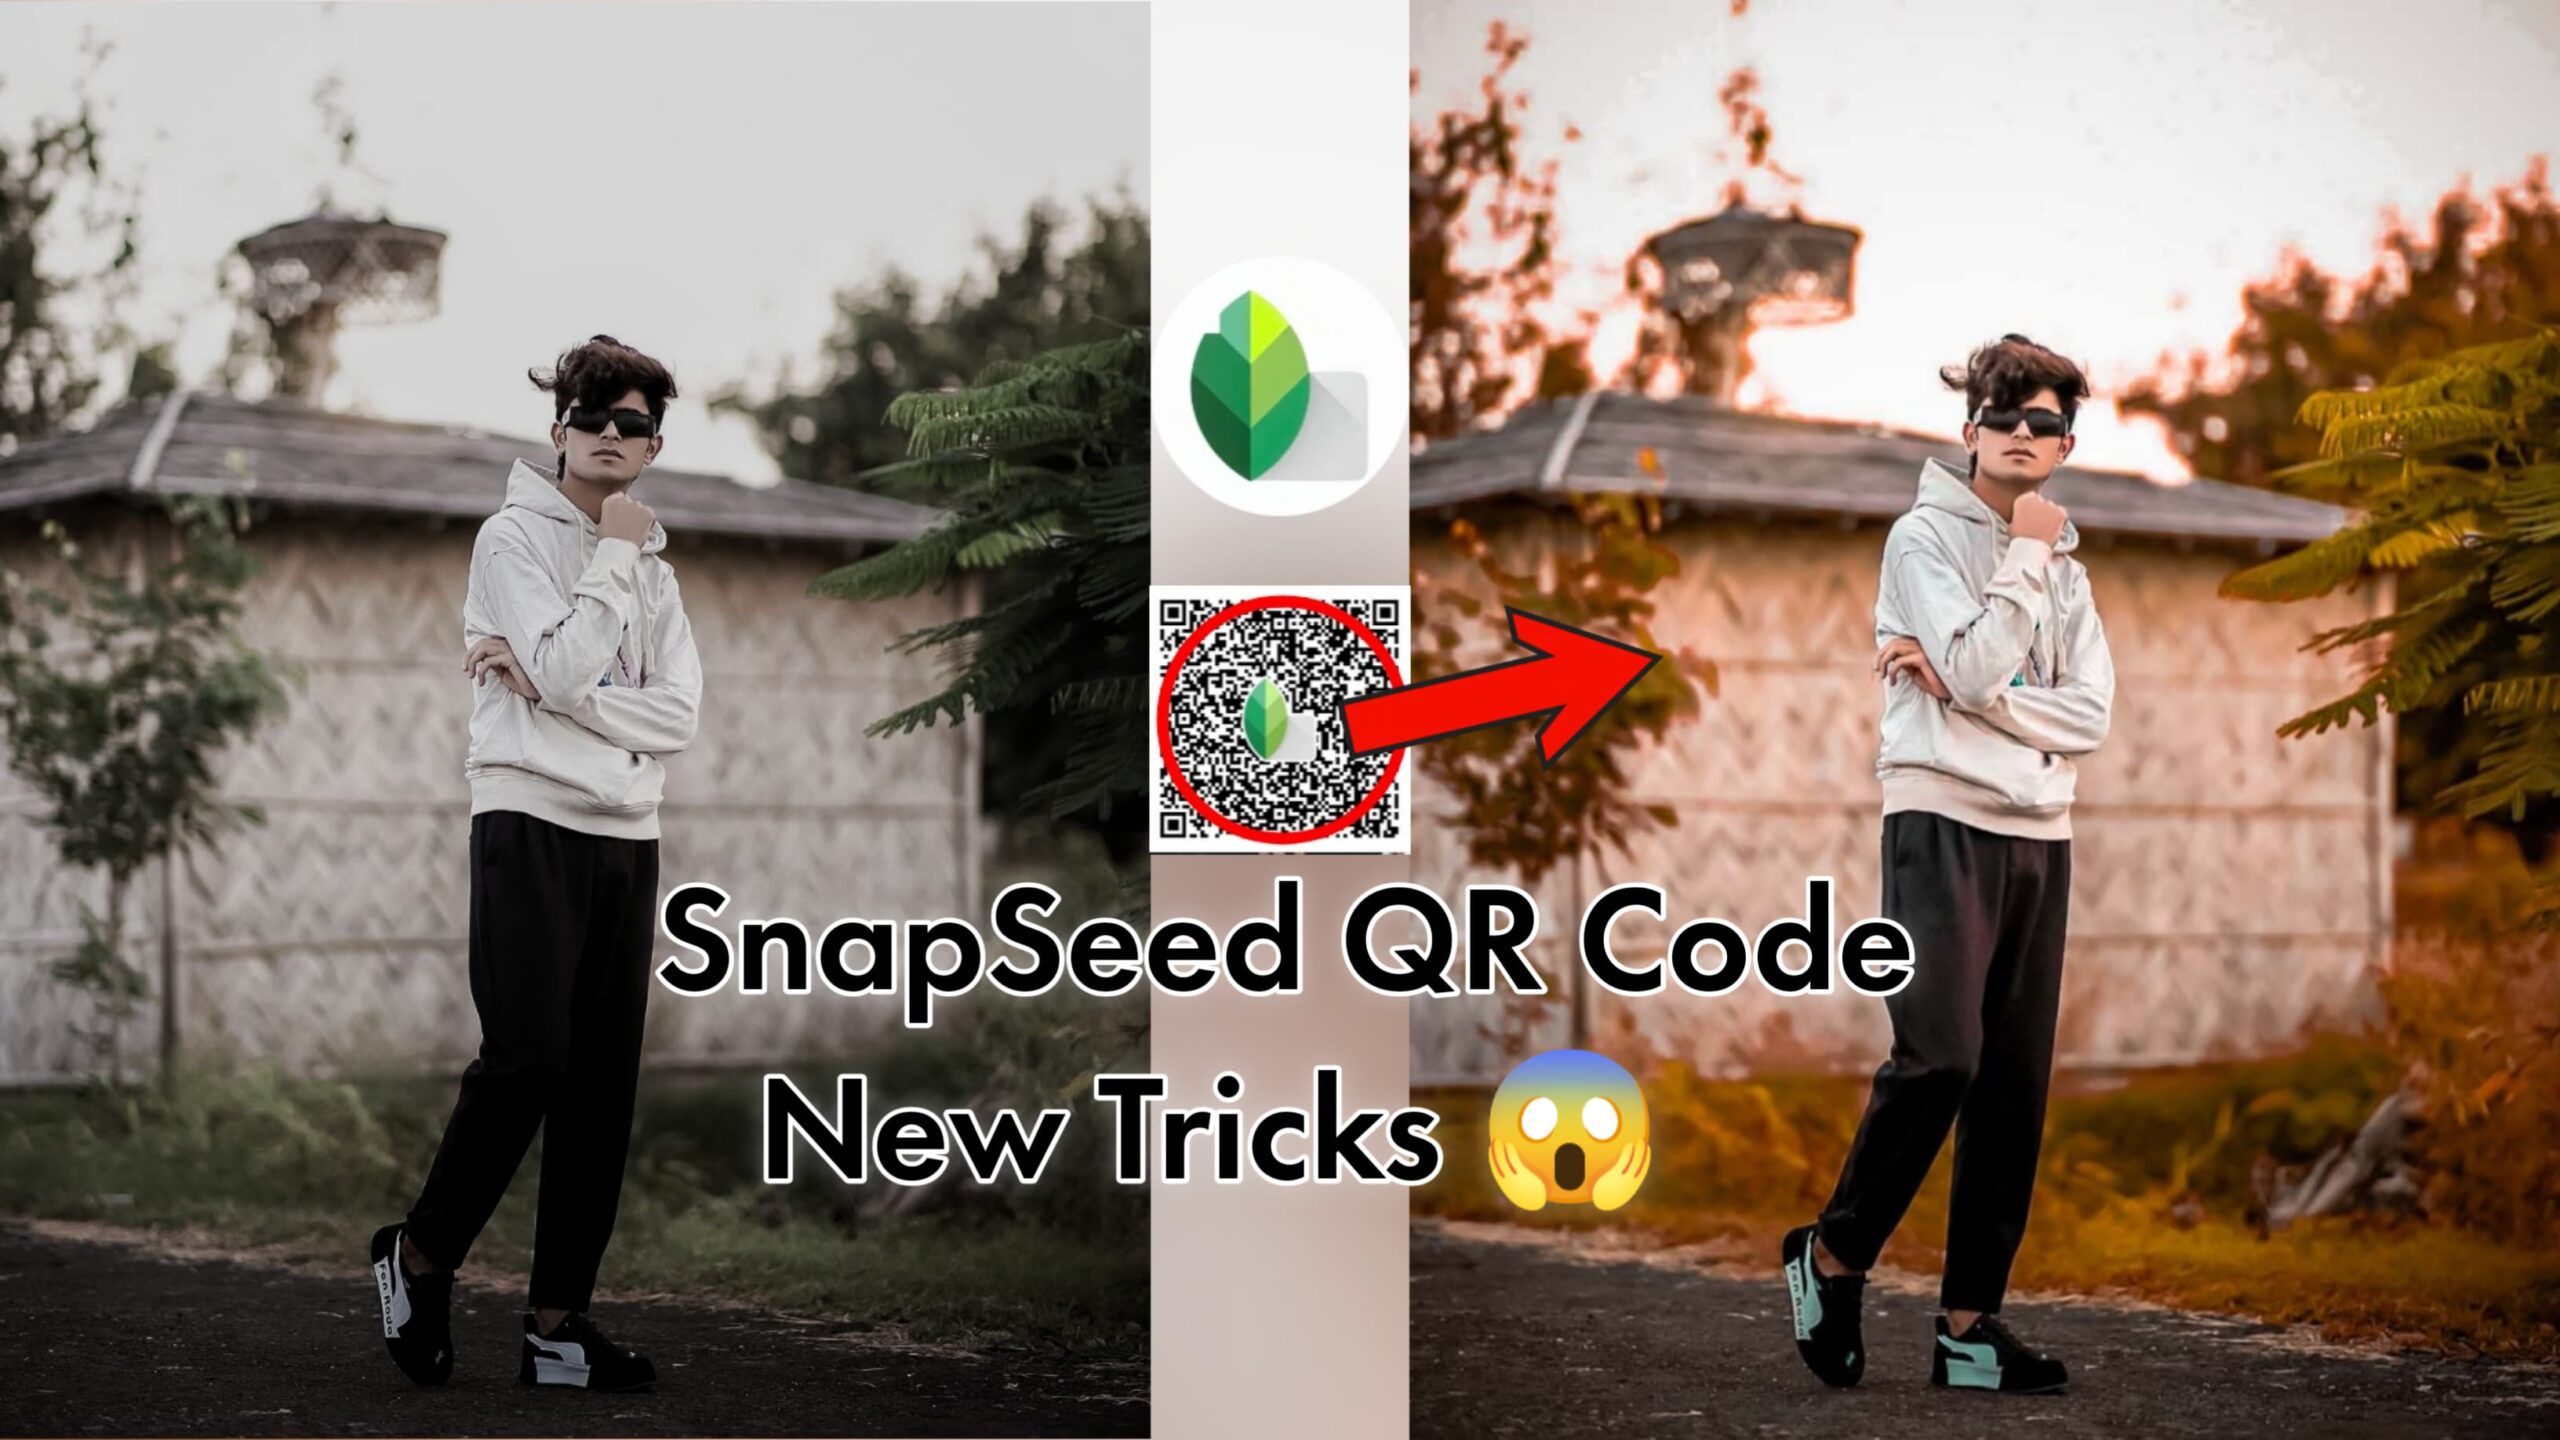 snapseed new qr codes free download. dark qr codes for snapseed photo editing